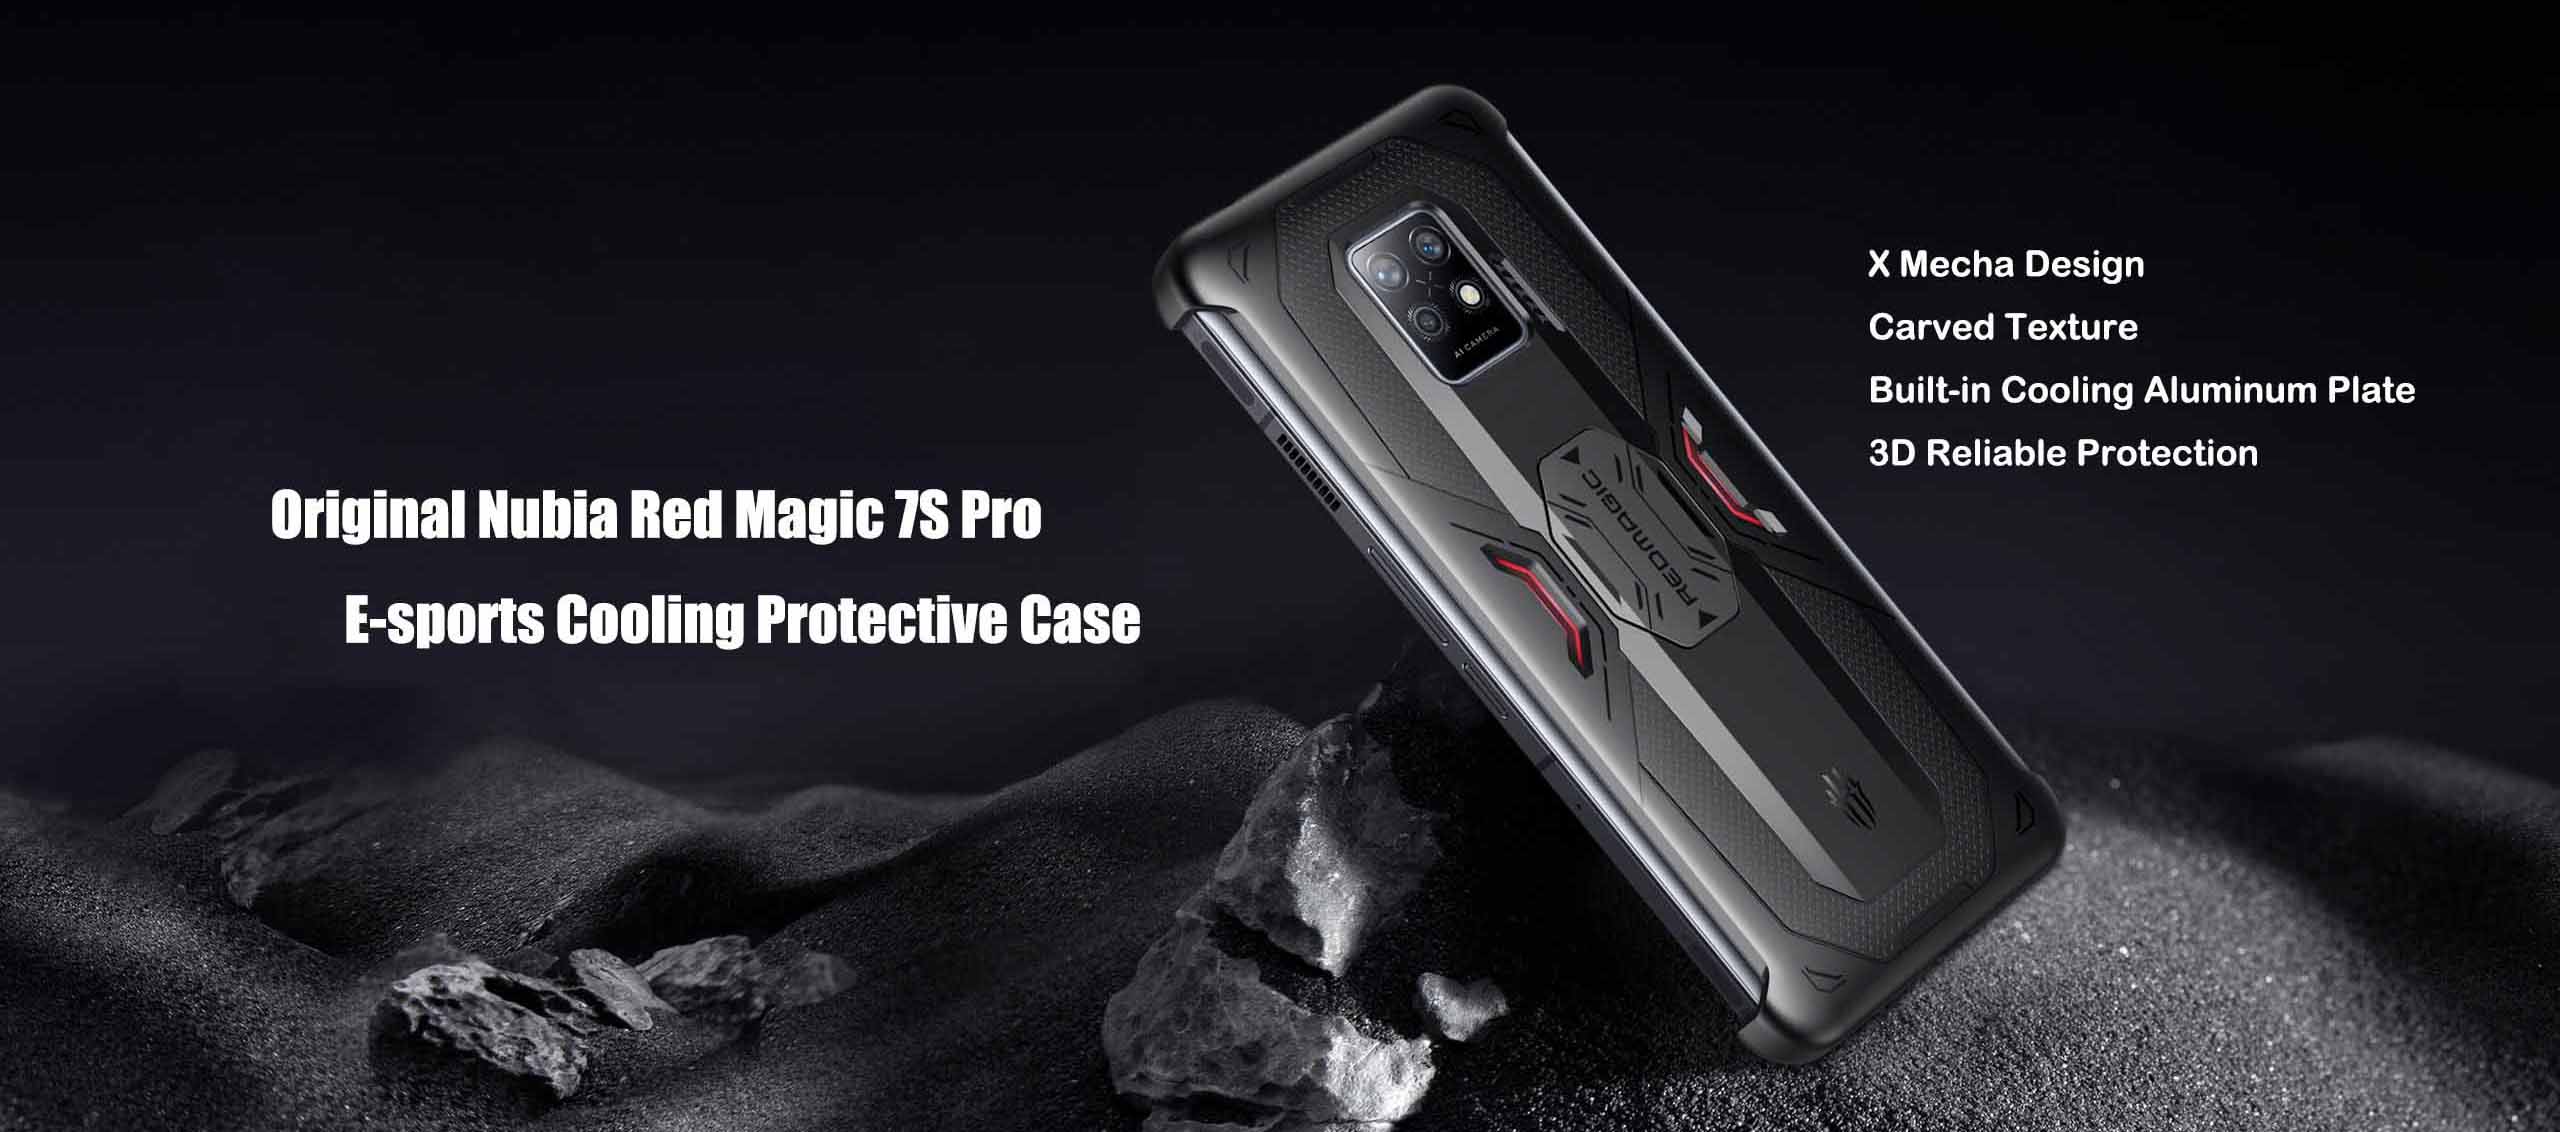 Nubia Red Magic 7S Pro Bundle E-sports Cooling Protective Case + Screen Protector